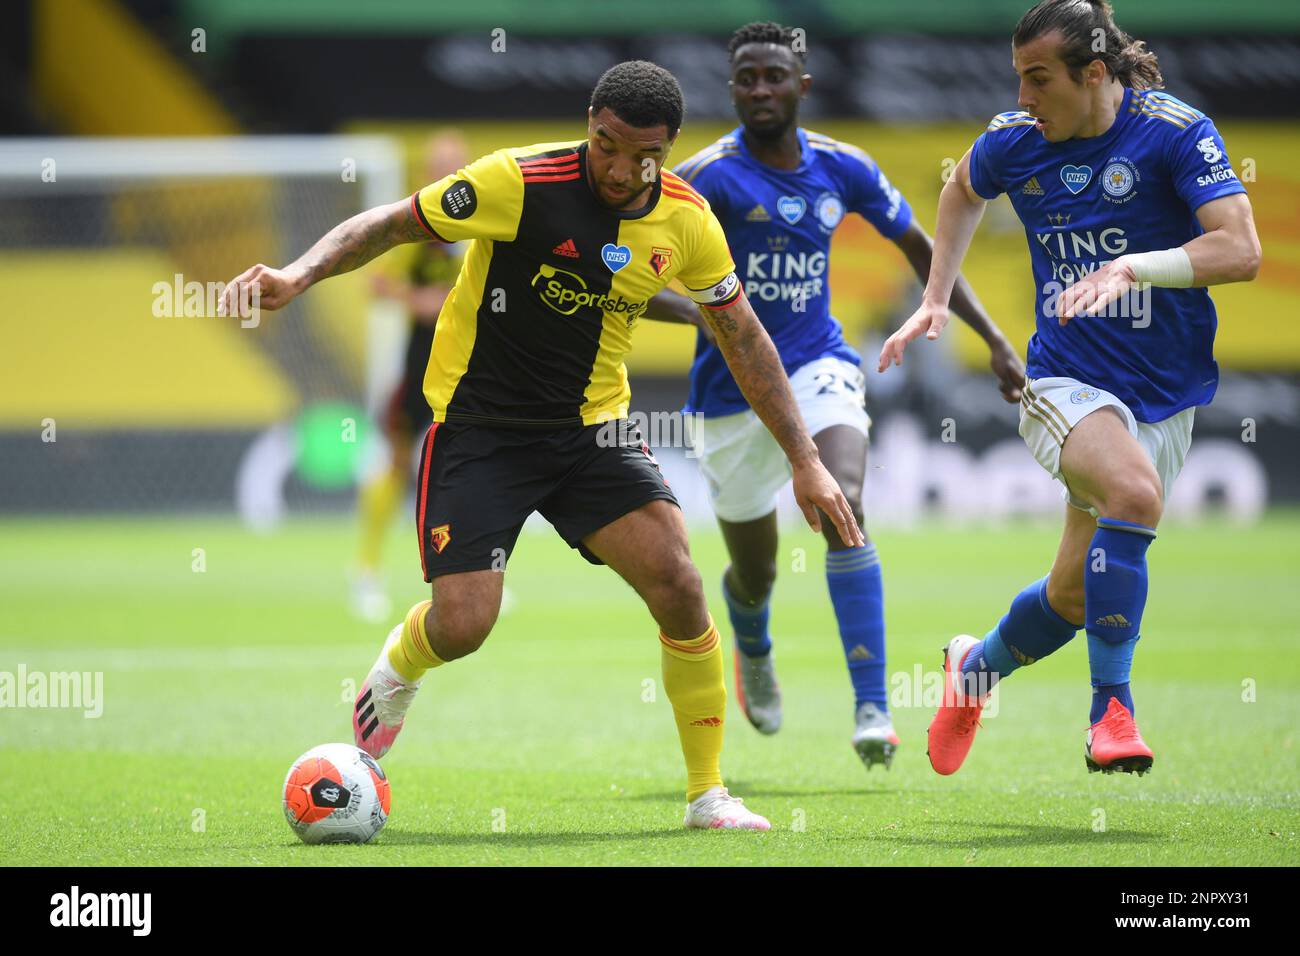 Watfords Troy Deeney, left, in action during the English Premier League soccer match between Watford and Leicester City at the Vicarage Road Stadium in Watford, England, Saturday, June 20, 2020